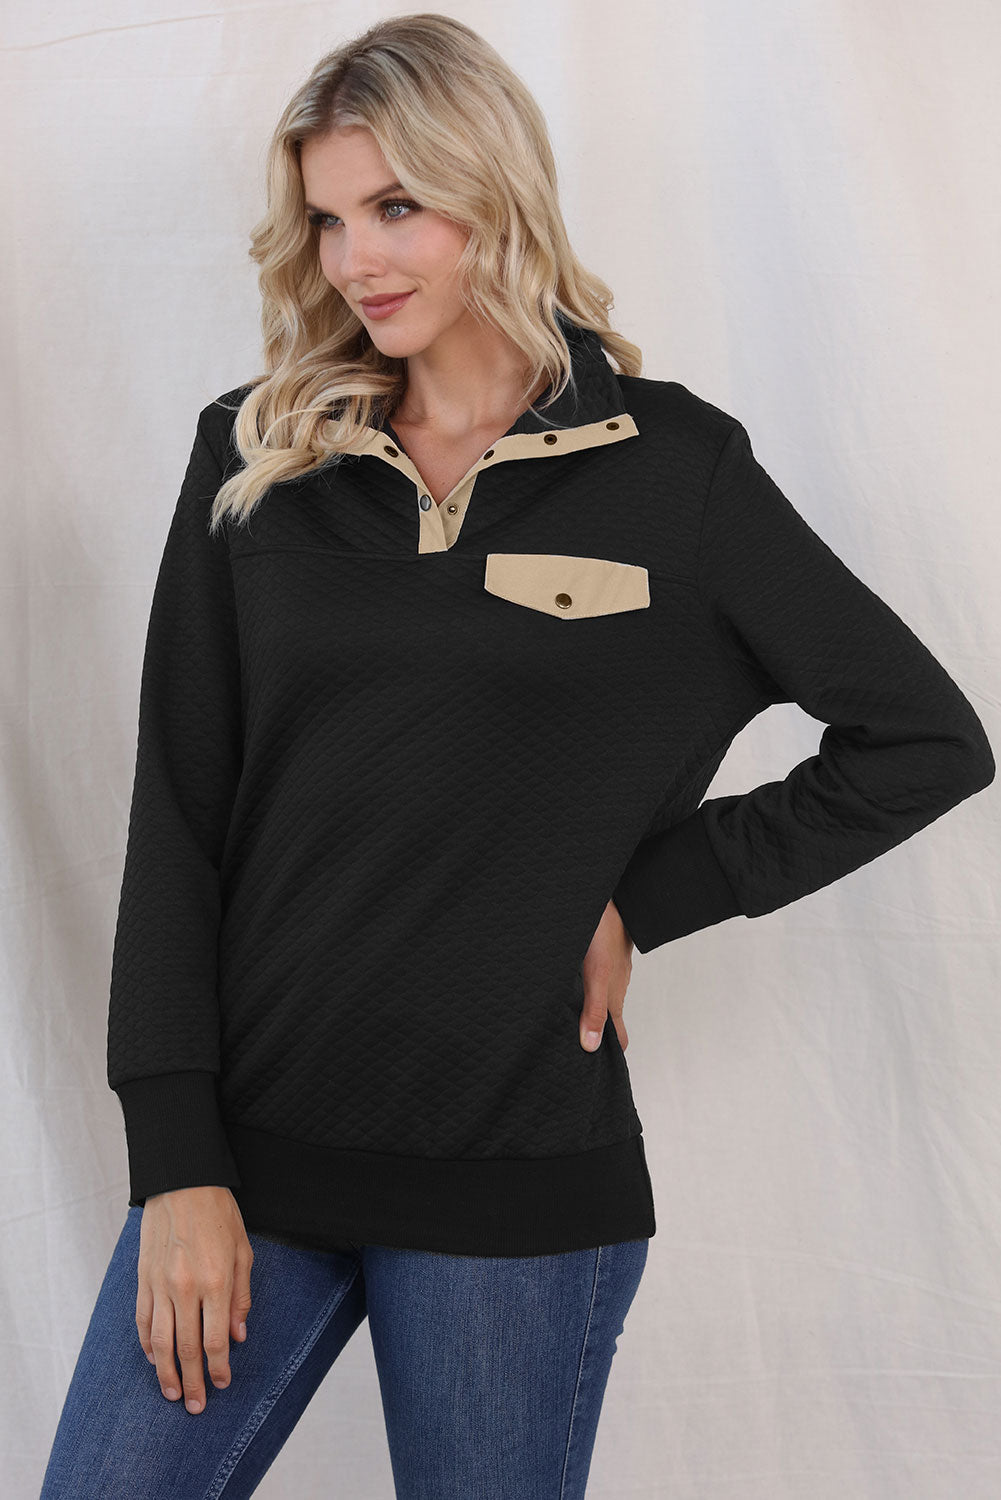 Collared Neck Long Sleeve Top - Women’s Clothing & Accessories - Shirts & Tops - 10 - 2024